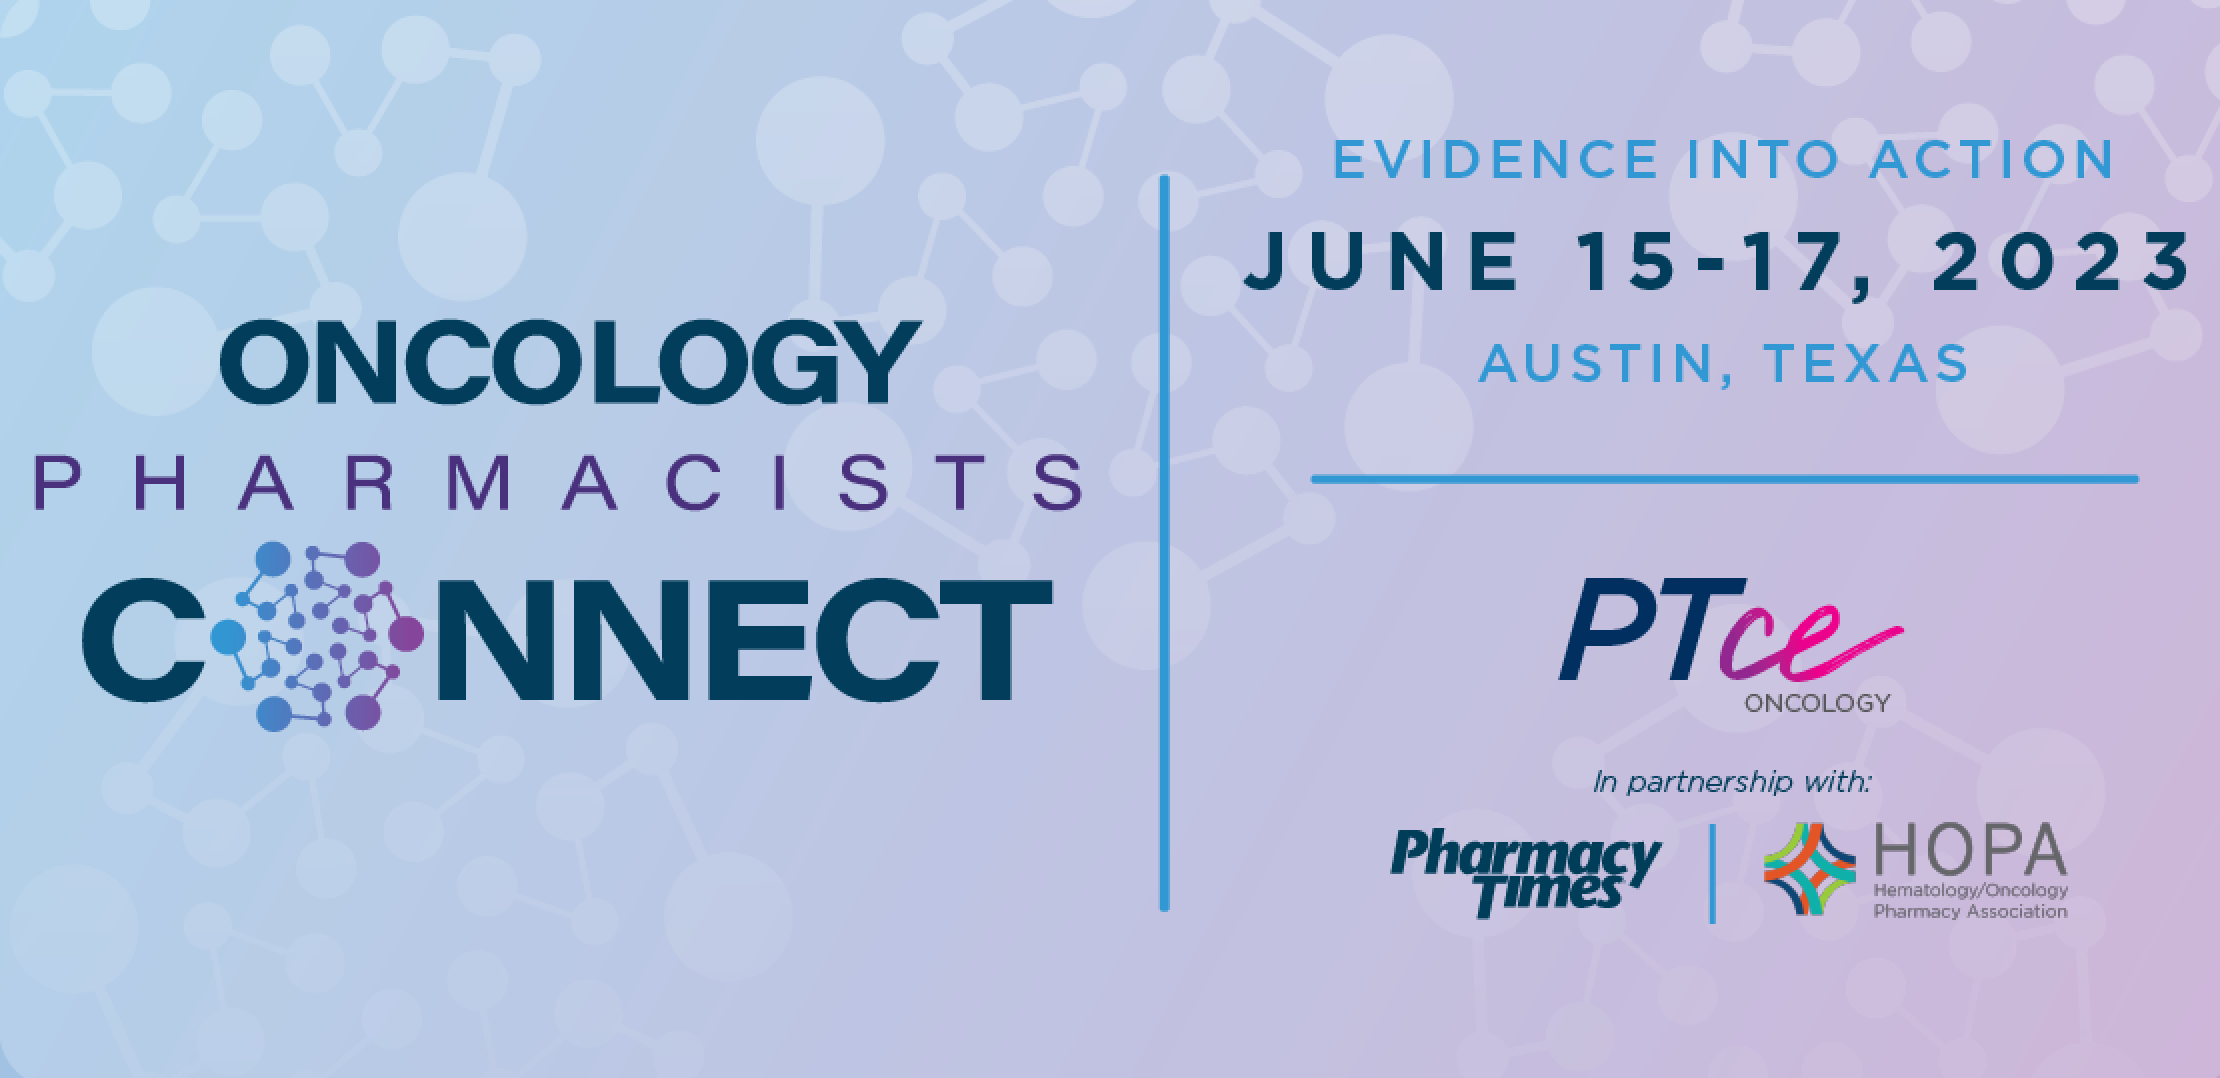 Oncology Pharmacists Connect Brings Together Thought Leaders From Multiple Practice Settings